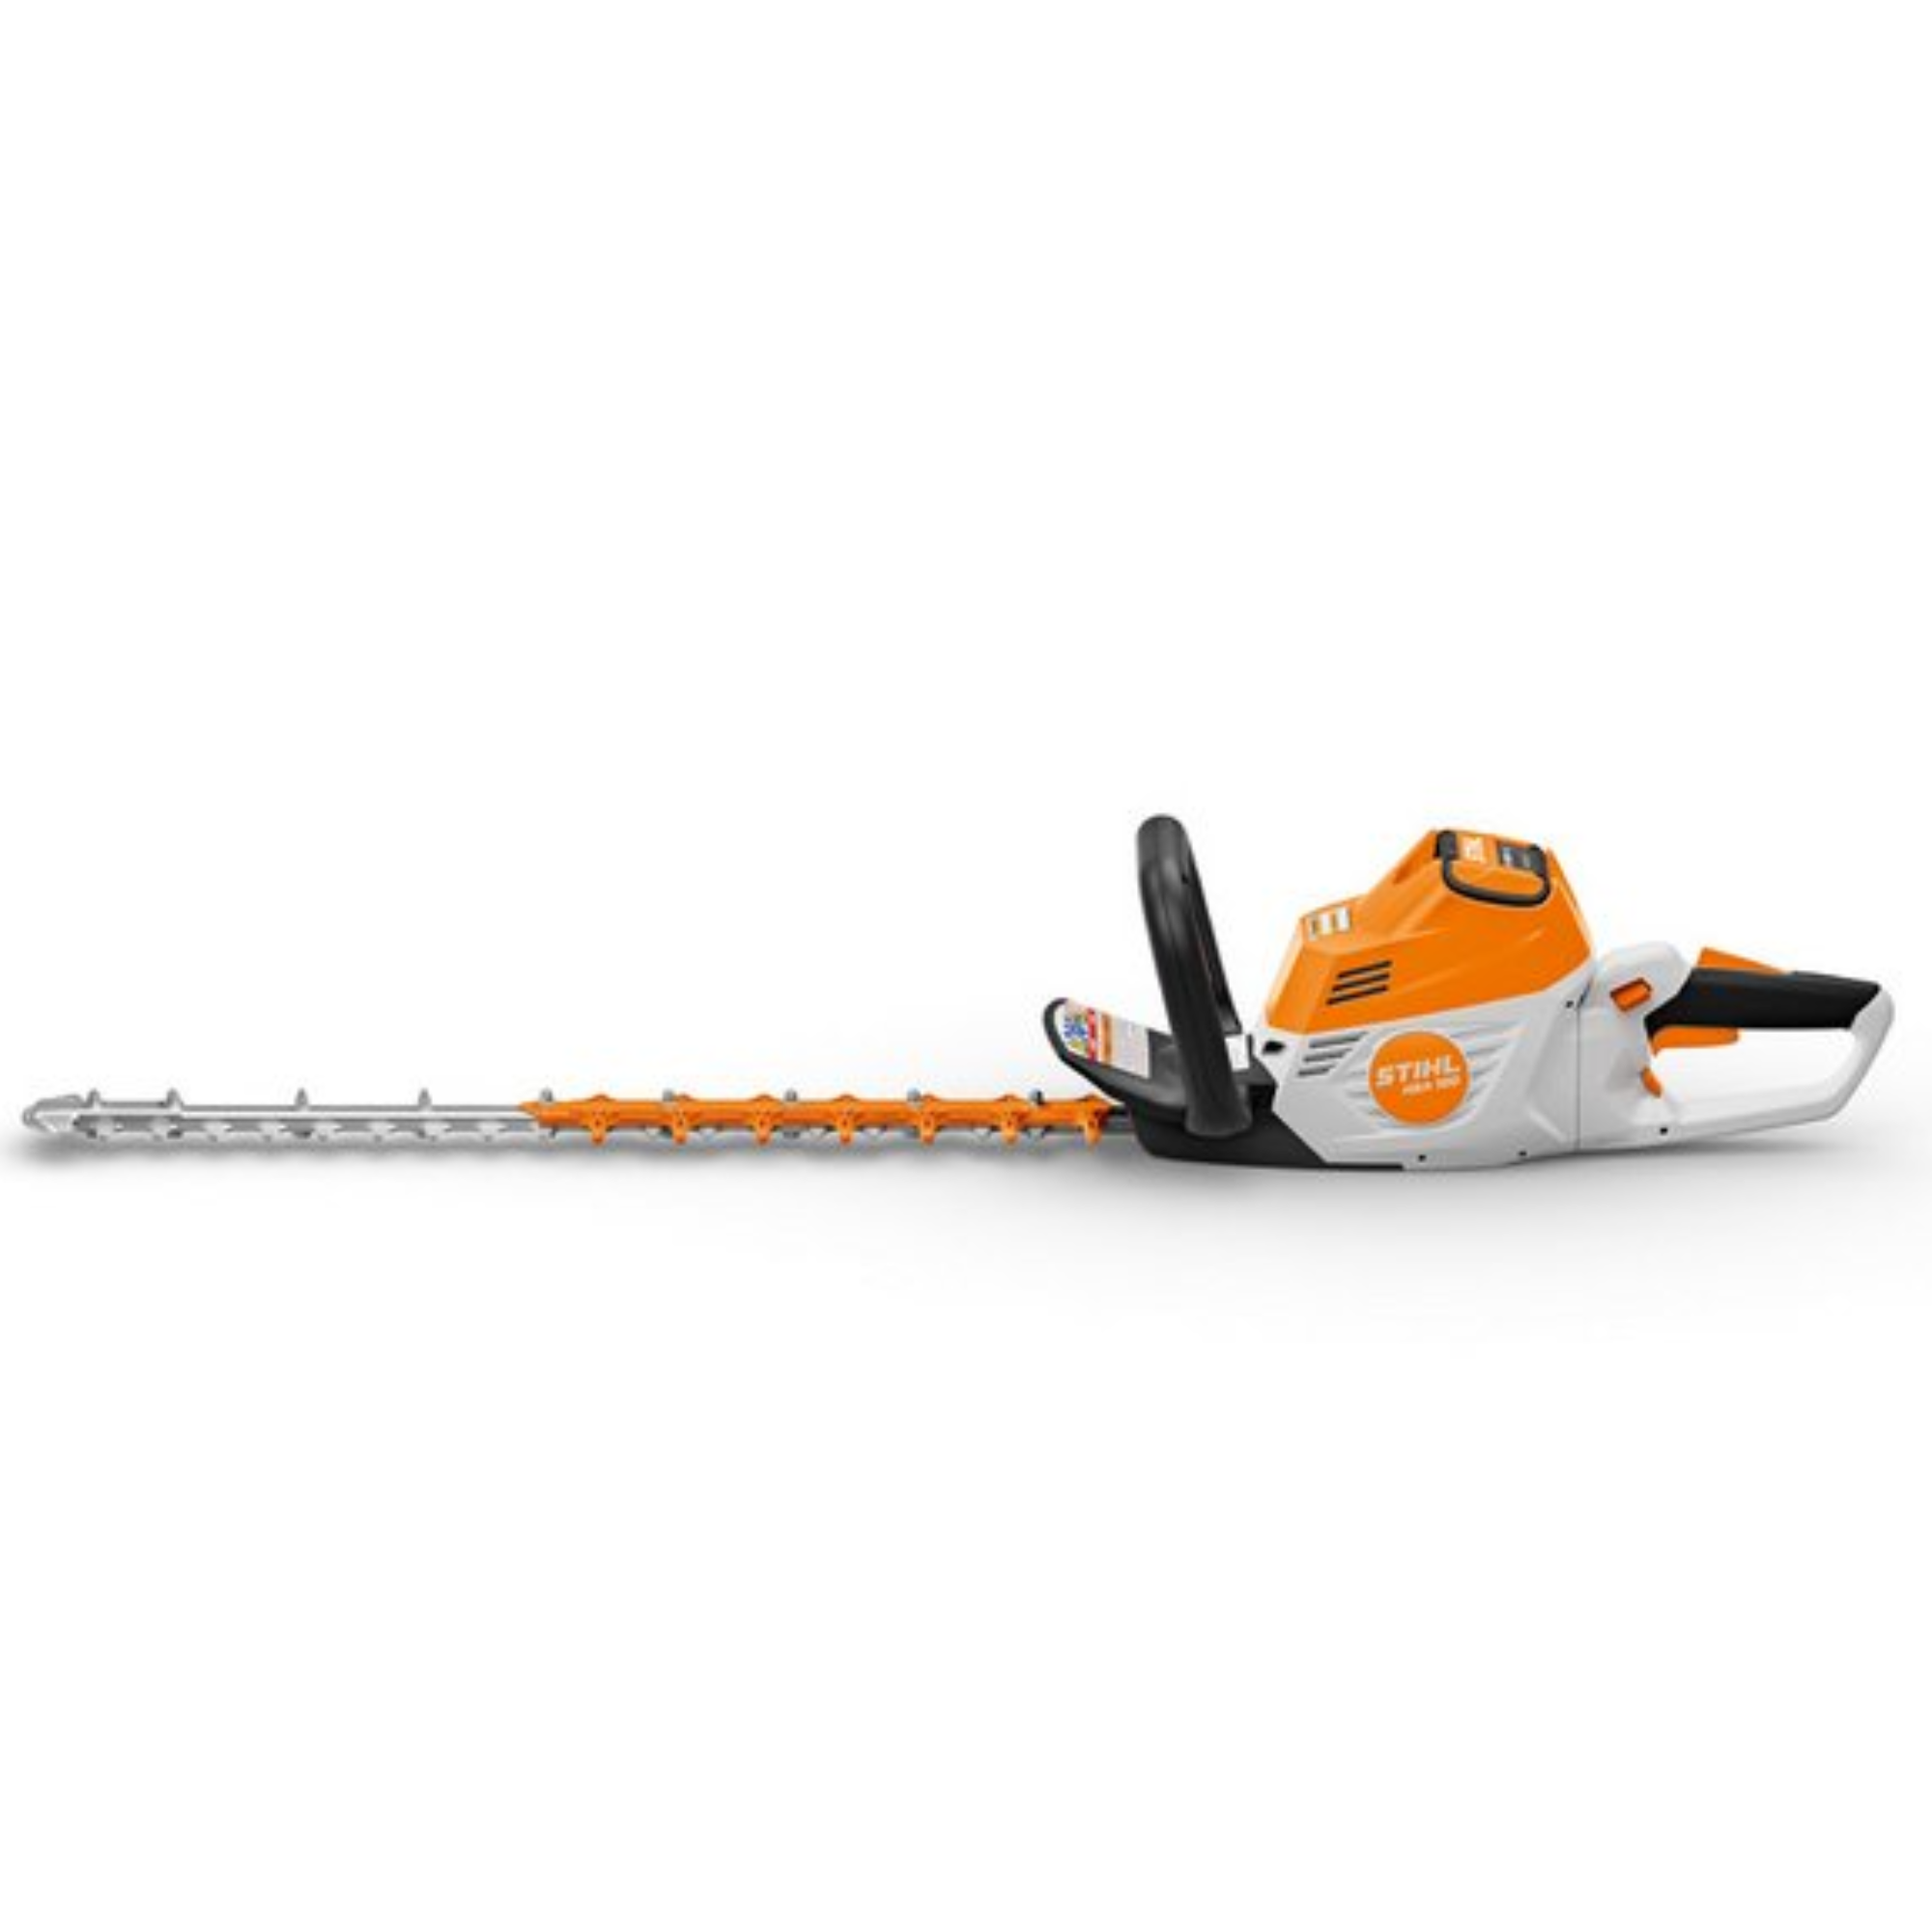 Stihl Commercial Grade Battery Powered HSA 100 Hedge Trimmer - Tool Only